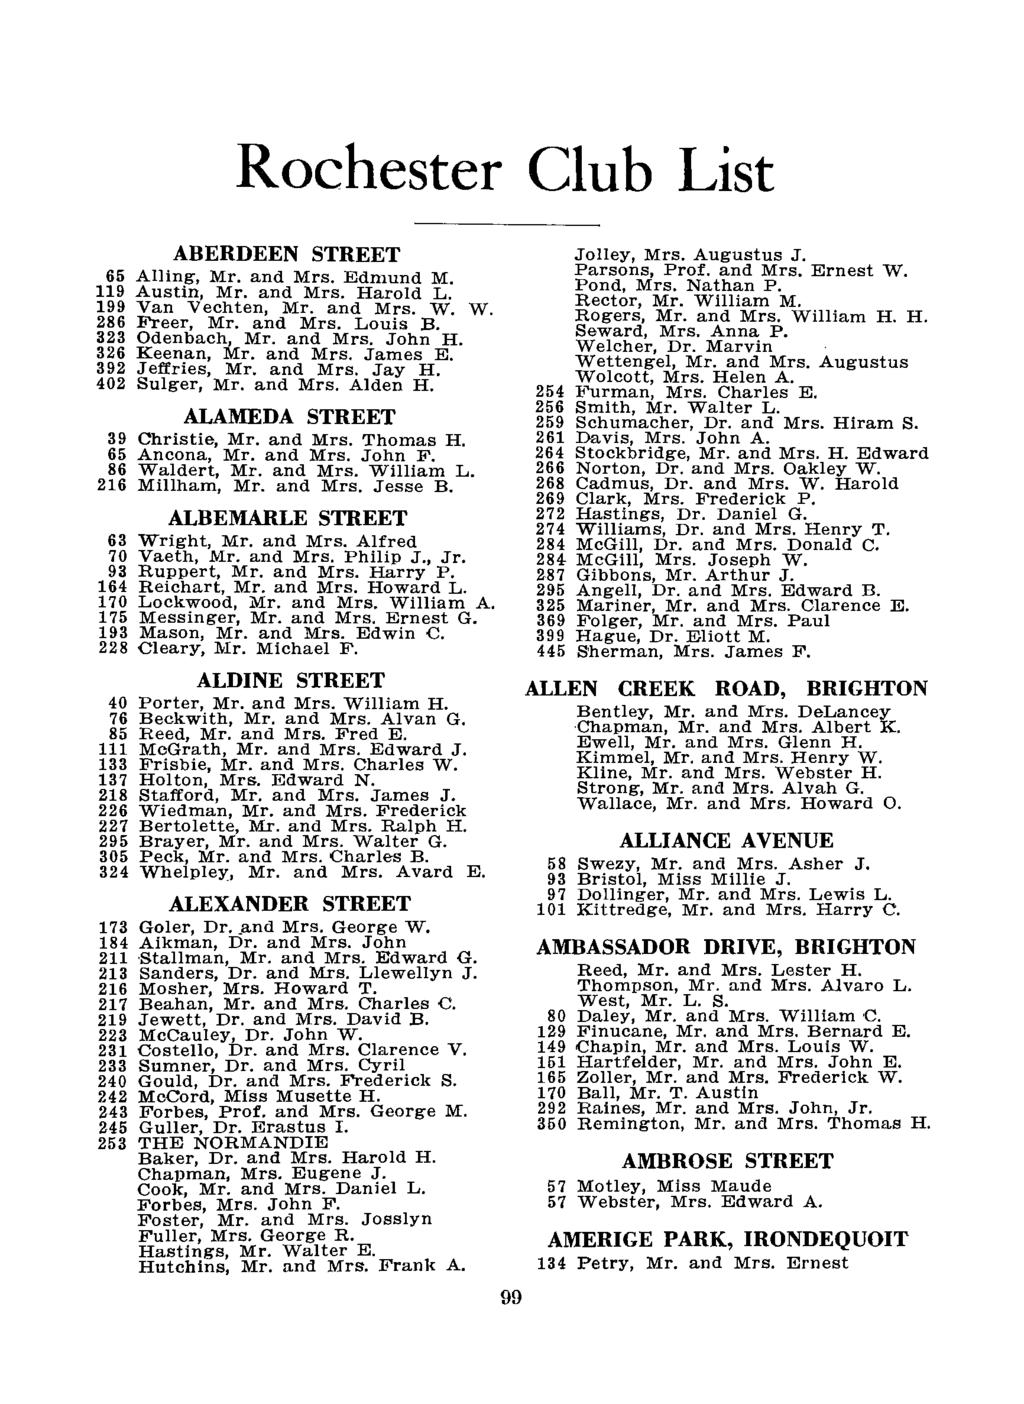 Rochester Club List ABERDEEN STREET 65 Ailing, Mr. and Mrs. Edmund M. 119 Austin, Mr. and Mrs. Harold L. 199 Van Vechten, Mr. and Mrs. W. W. 286 Freer, Mr. and Mrs. Louis B. 323 Odenbach, Mr. and Mrs. John H.